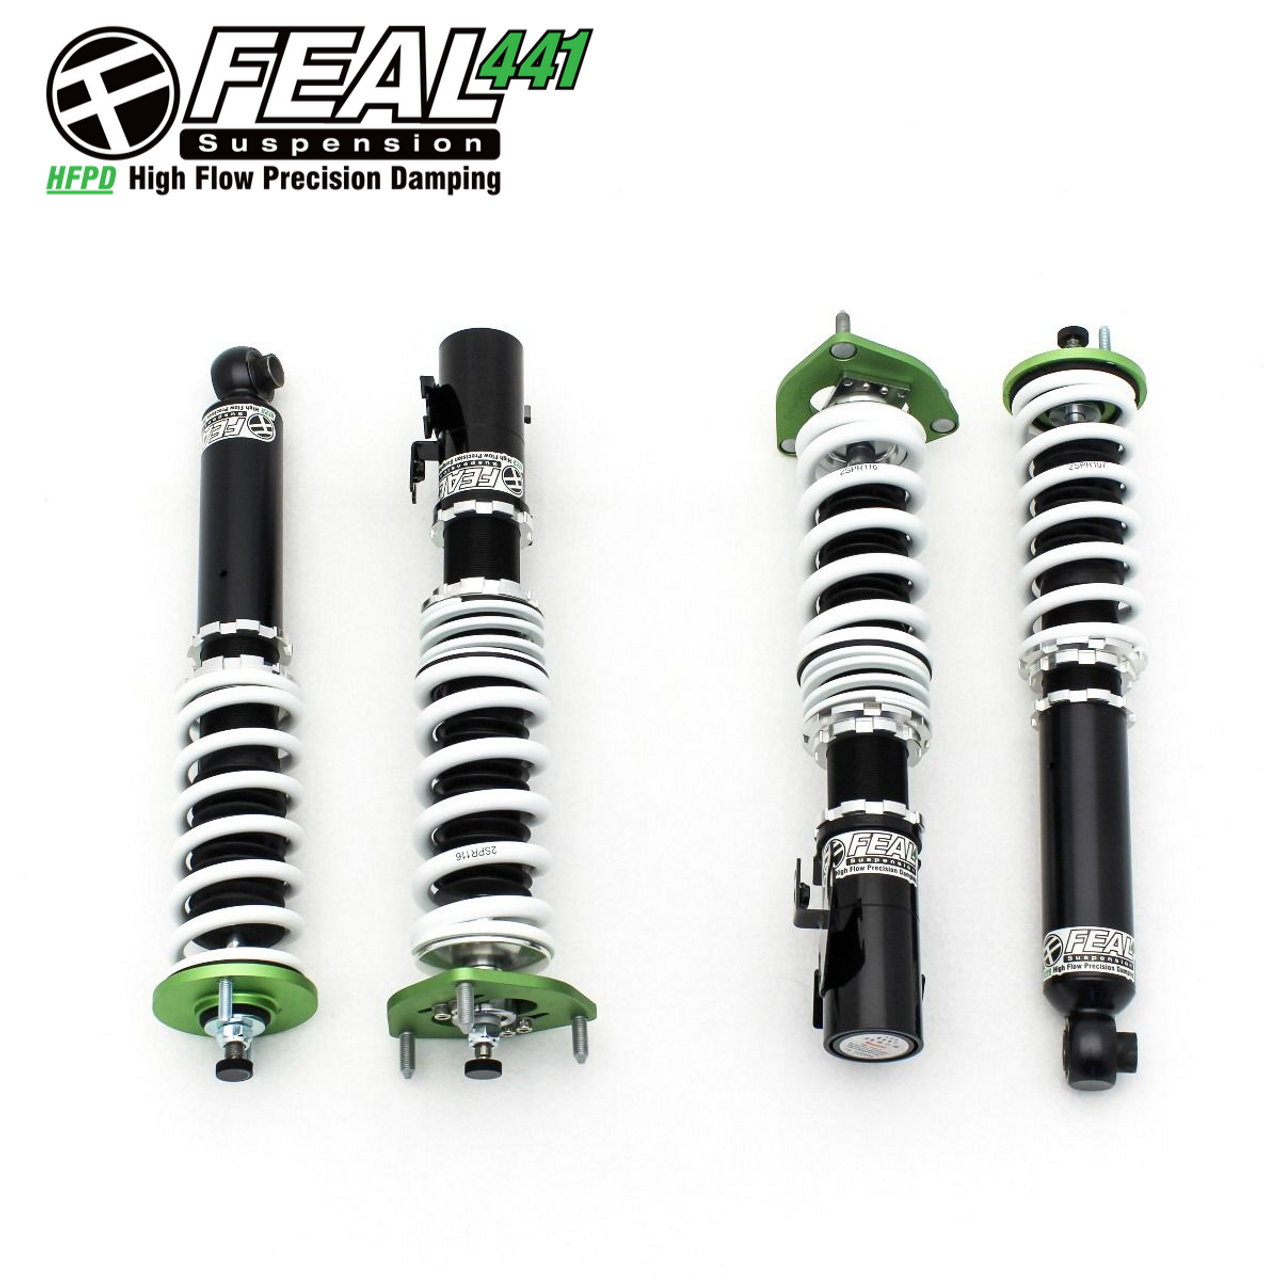 Feal Suspension 441 Coilover Kit, AWD - Nissan R33 GT-R